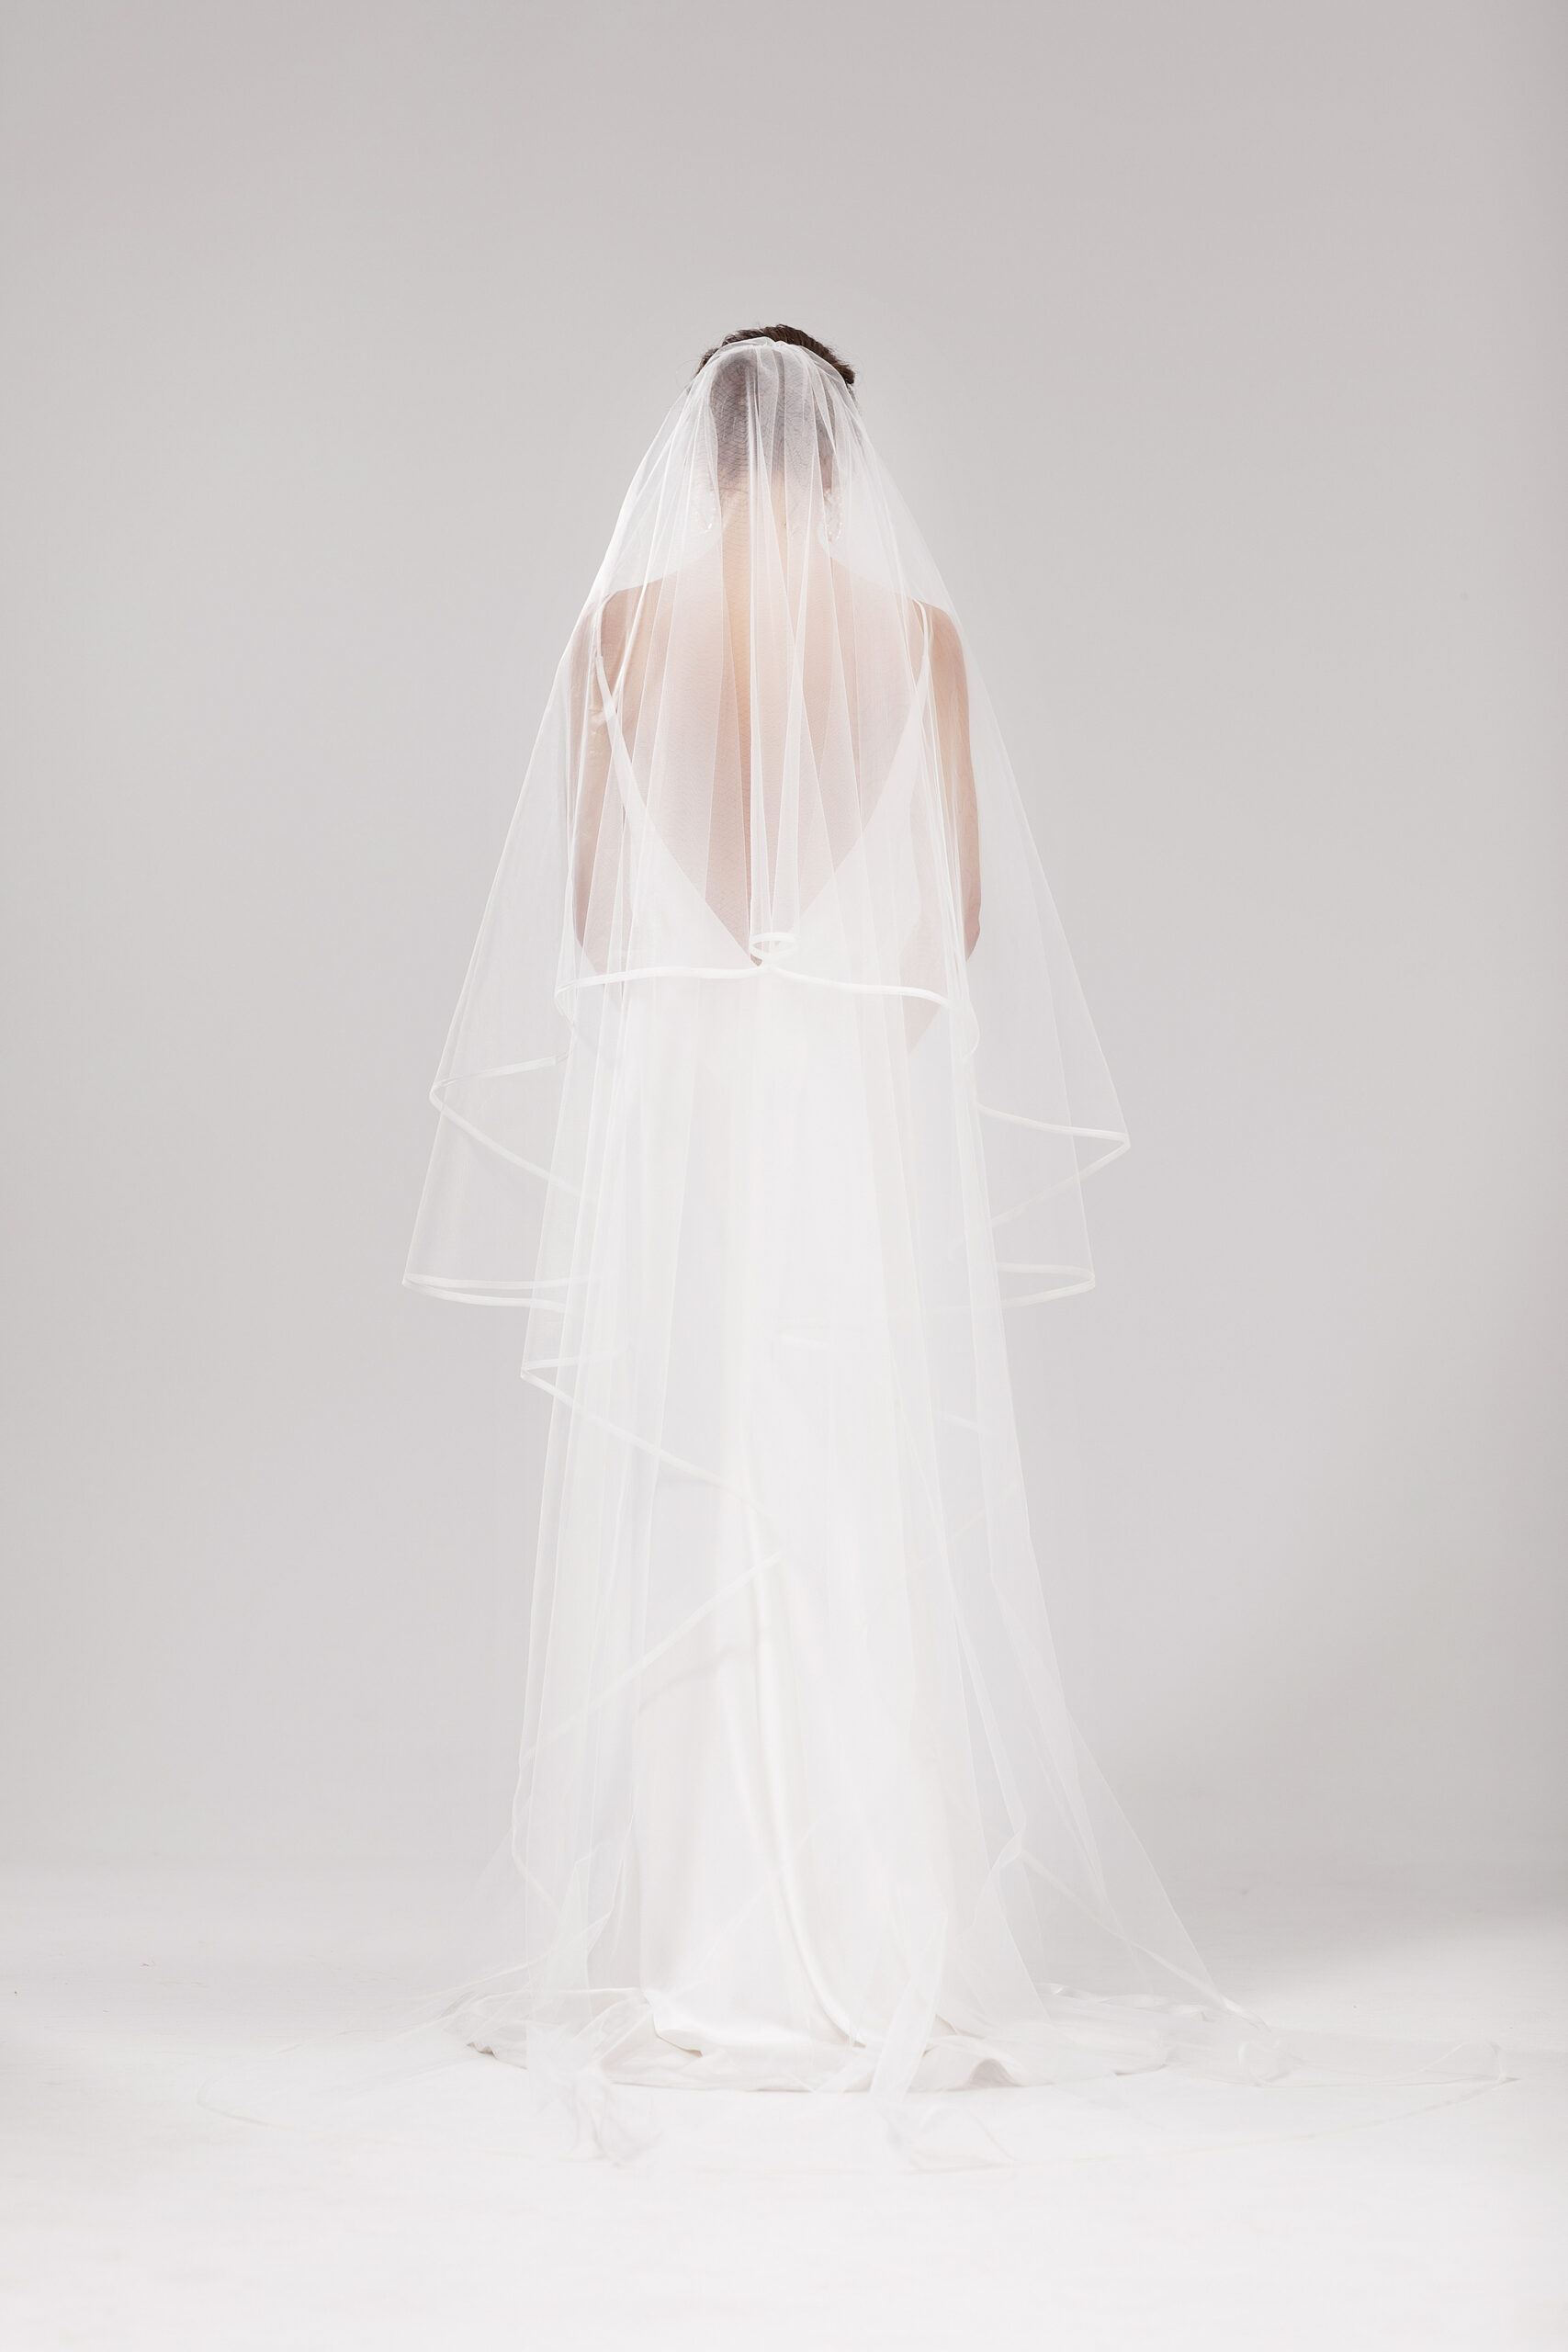 Back view of model wearing Snow in two tiers behind head. Snow is a 2.5m two-tier blusher style veil with an organza binding on the edge.